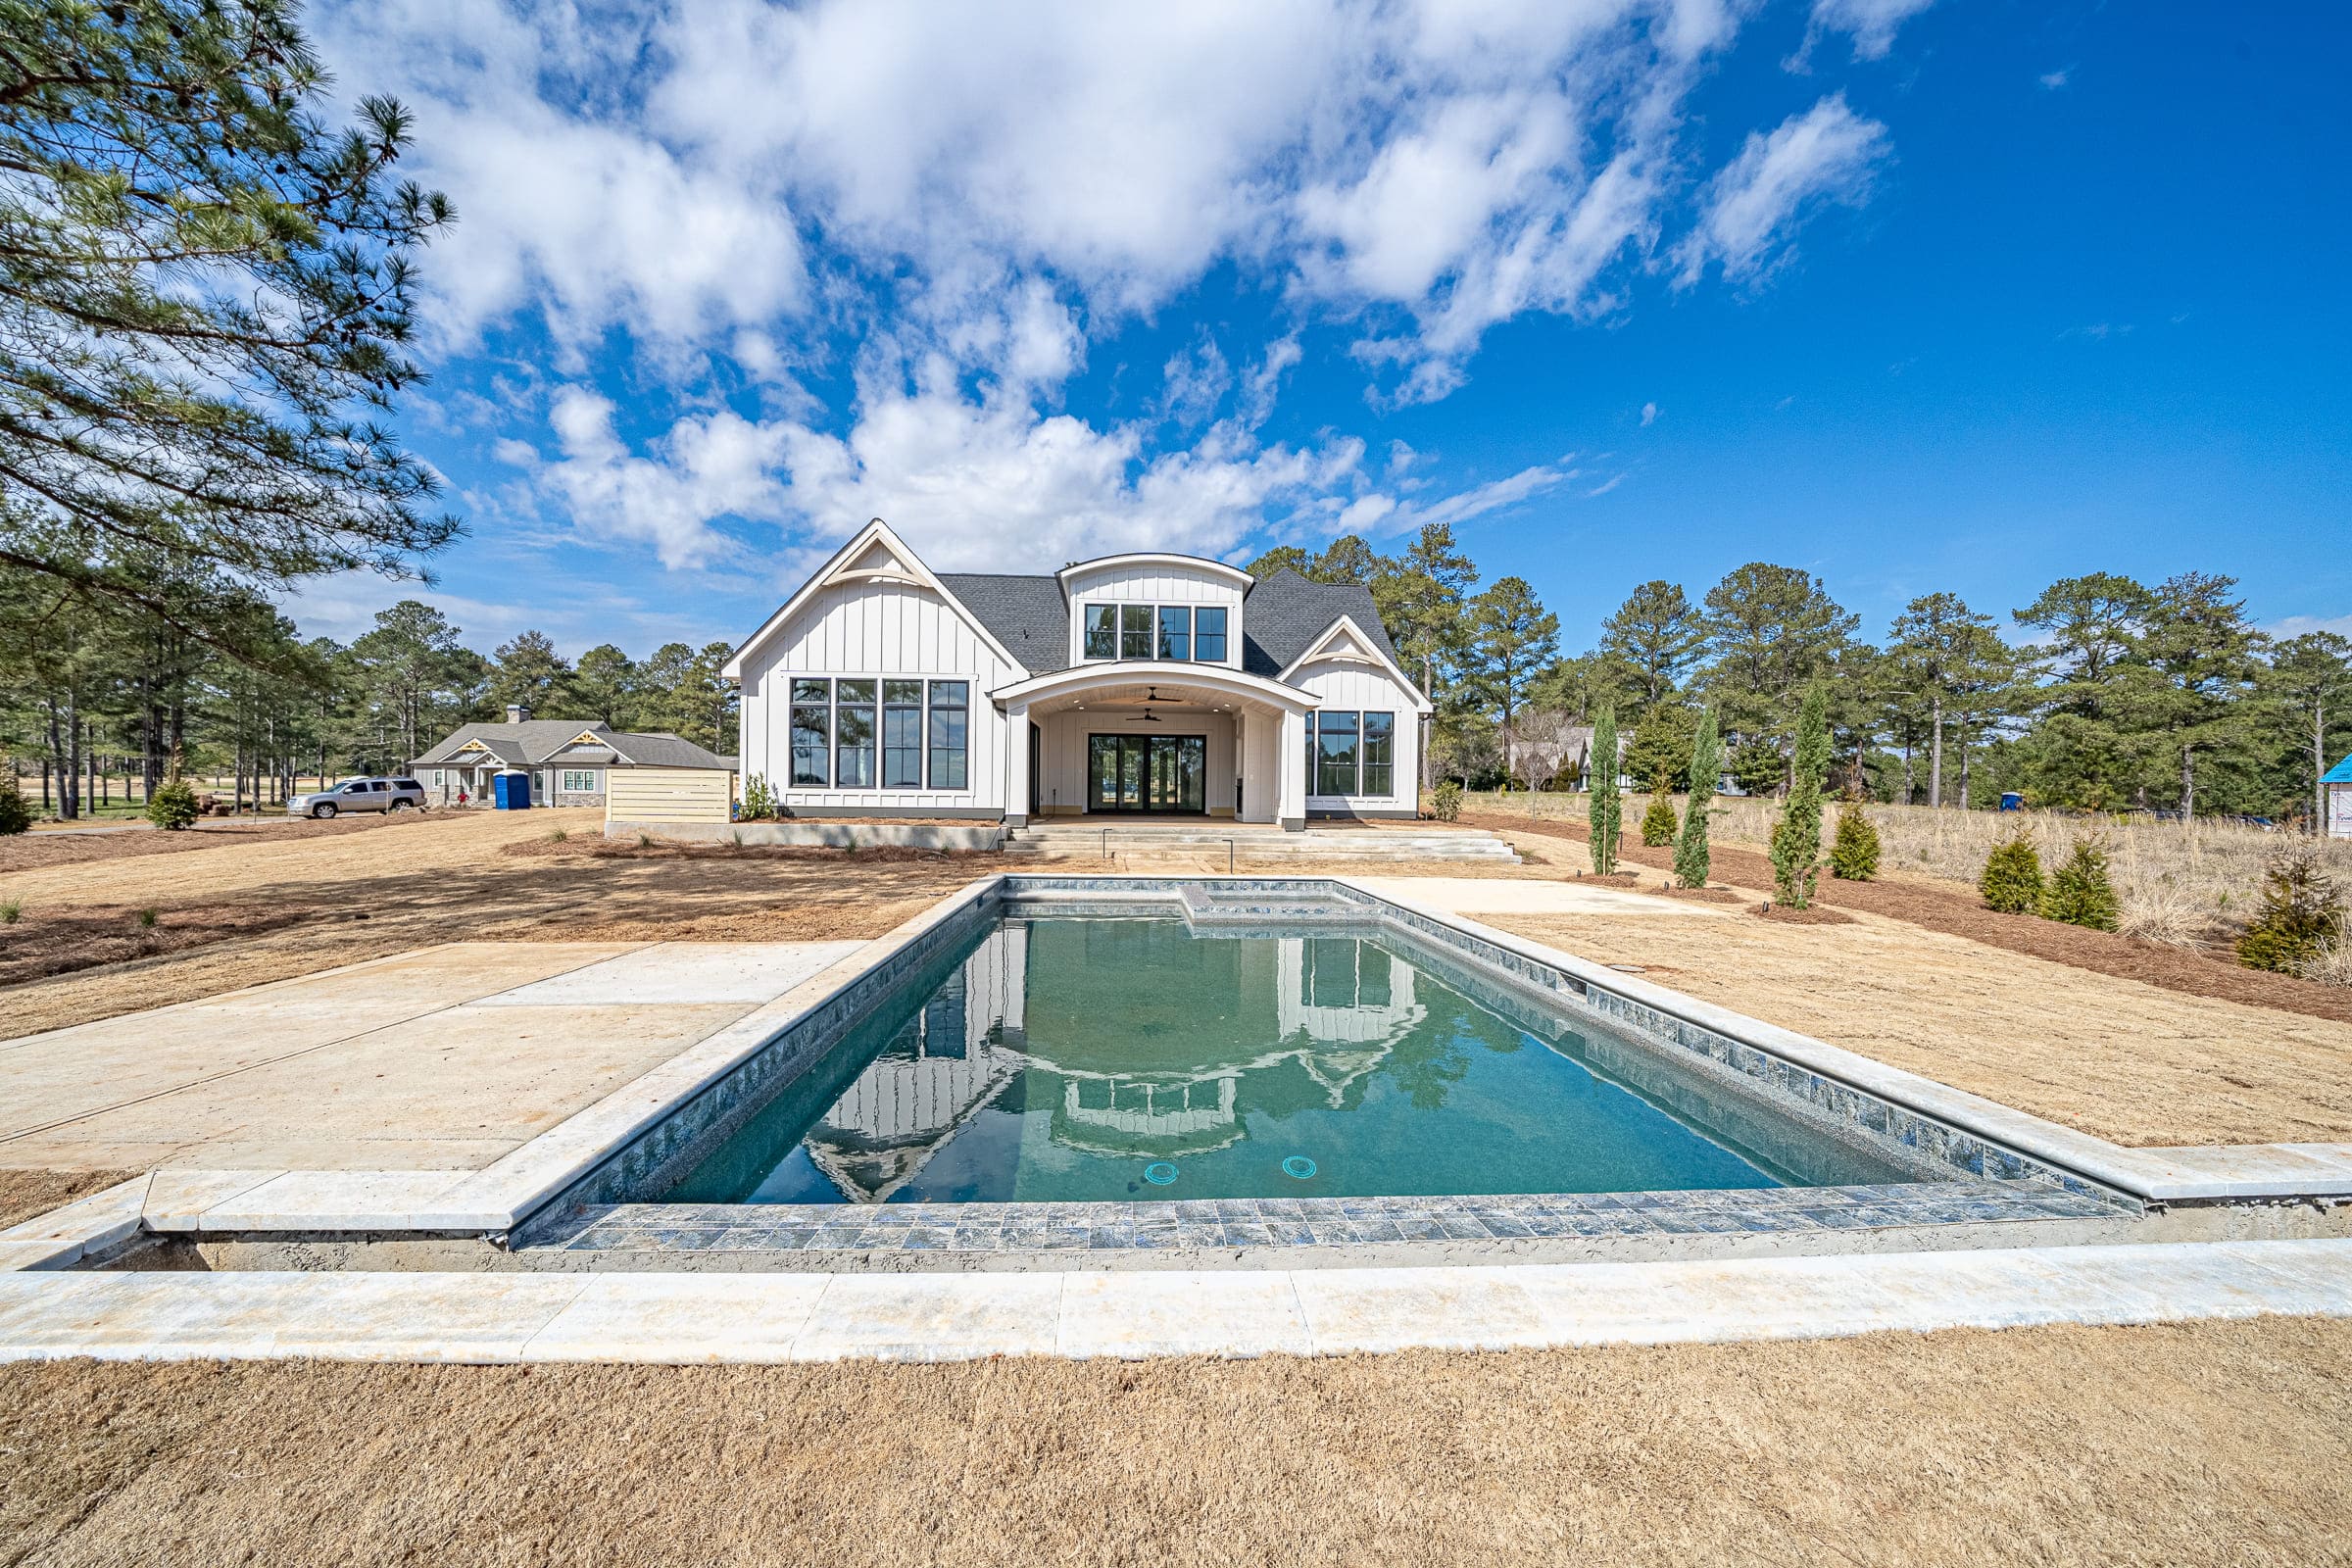 Large Built-in Pool and Backyard Views |PAXISgroup